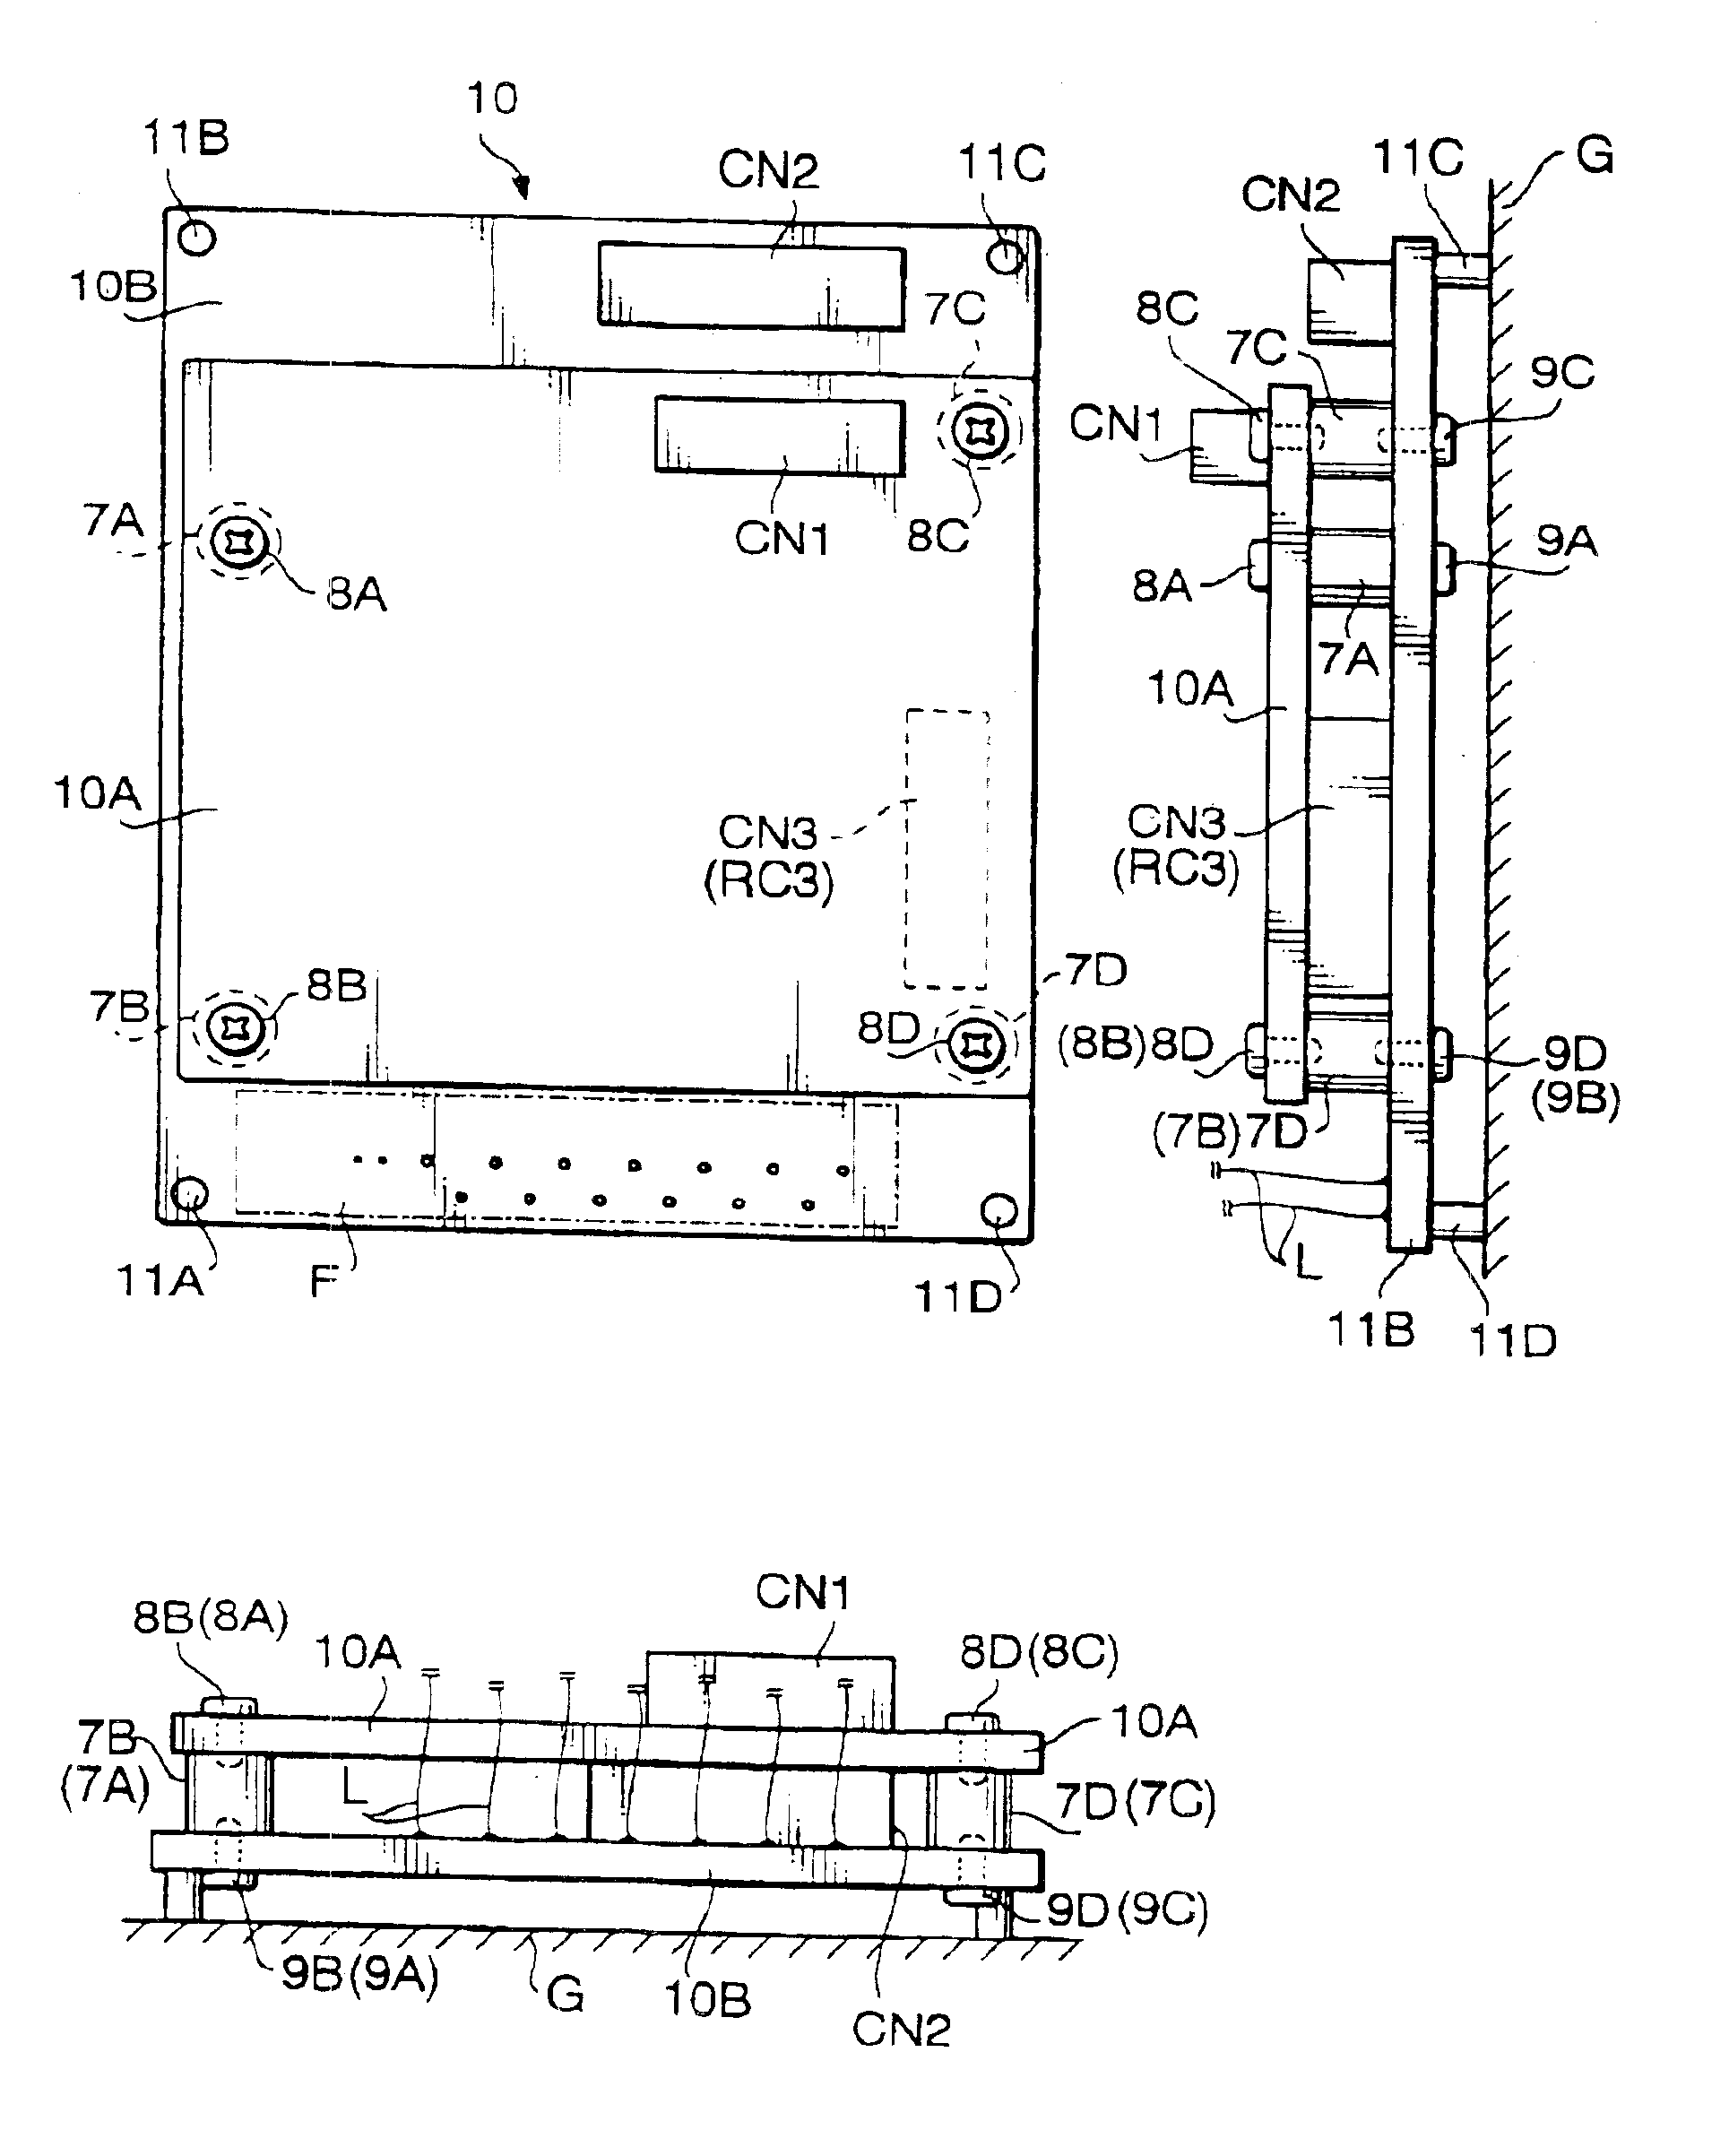 PCB structure for scope unit of electronic endoscope